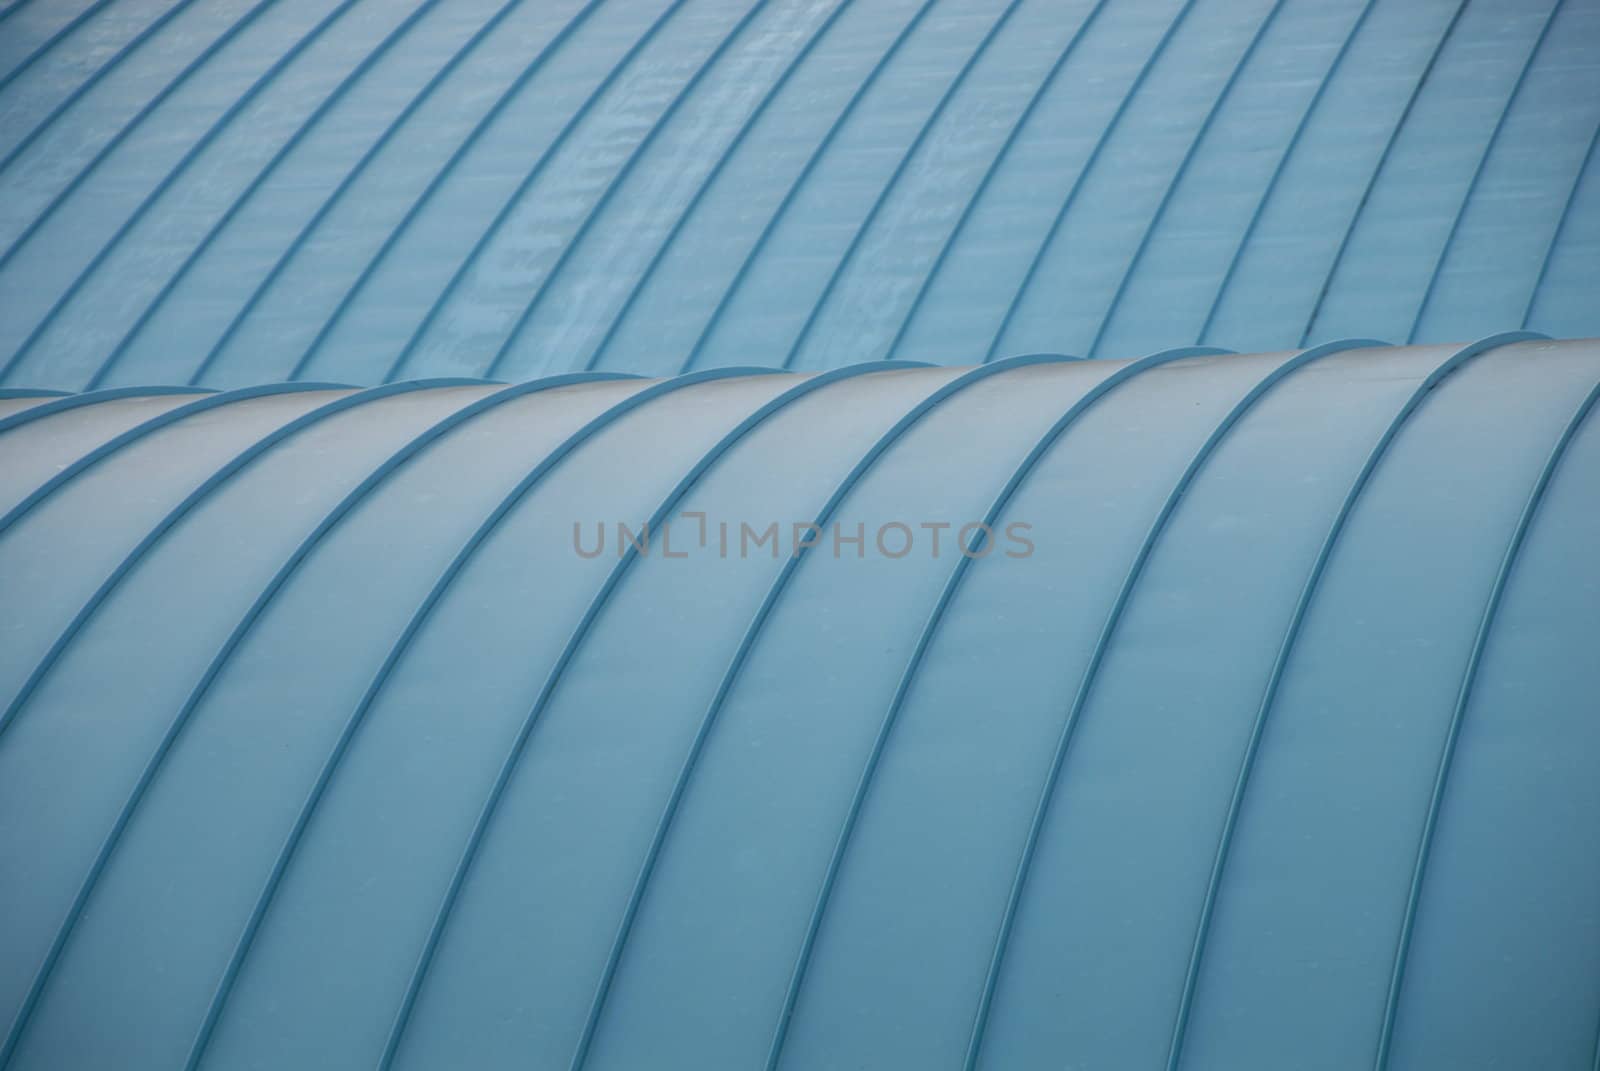 A close view of a curved blue roof